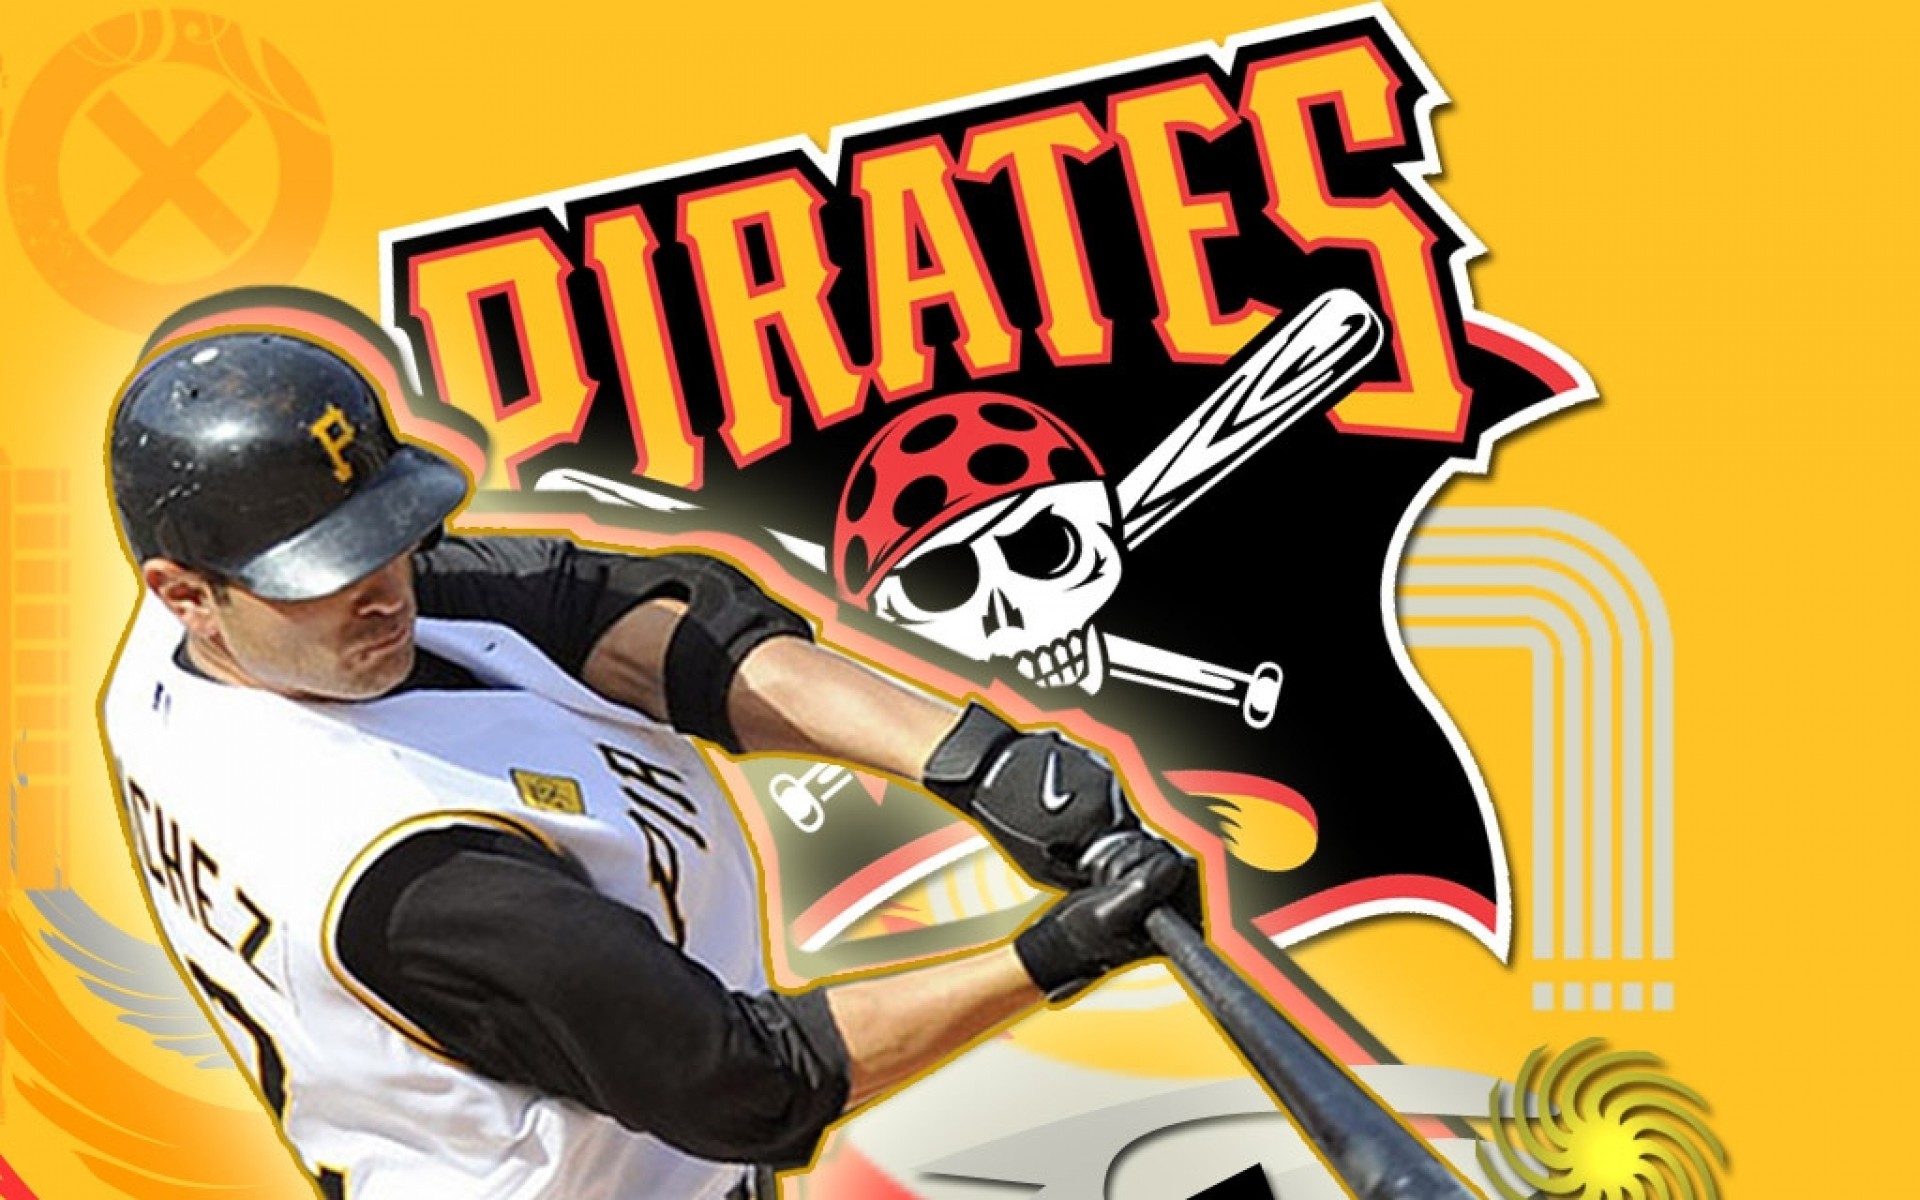 1920x1200 Pittsburgh Pirates HD Wallpapers | Hd Wallpapers